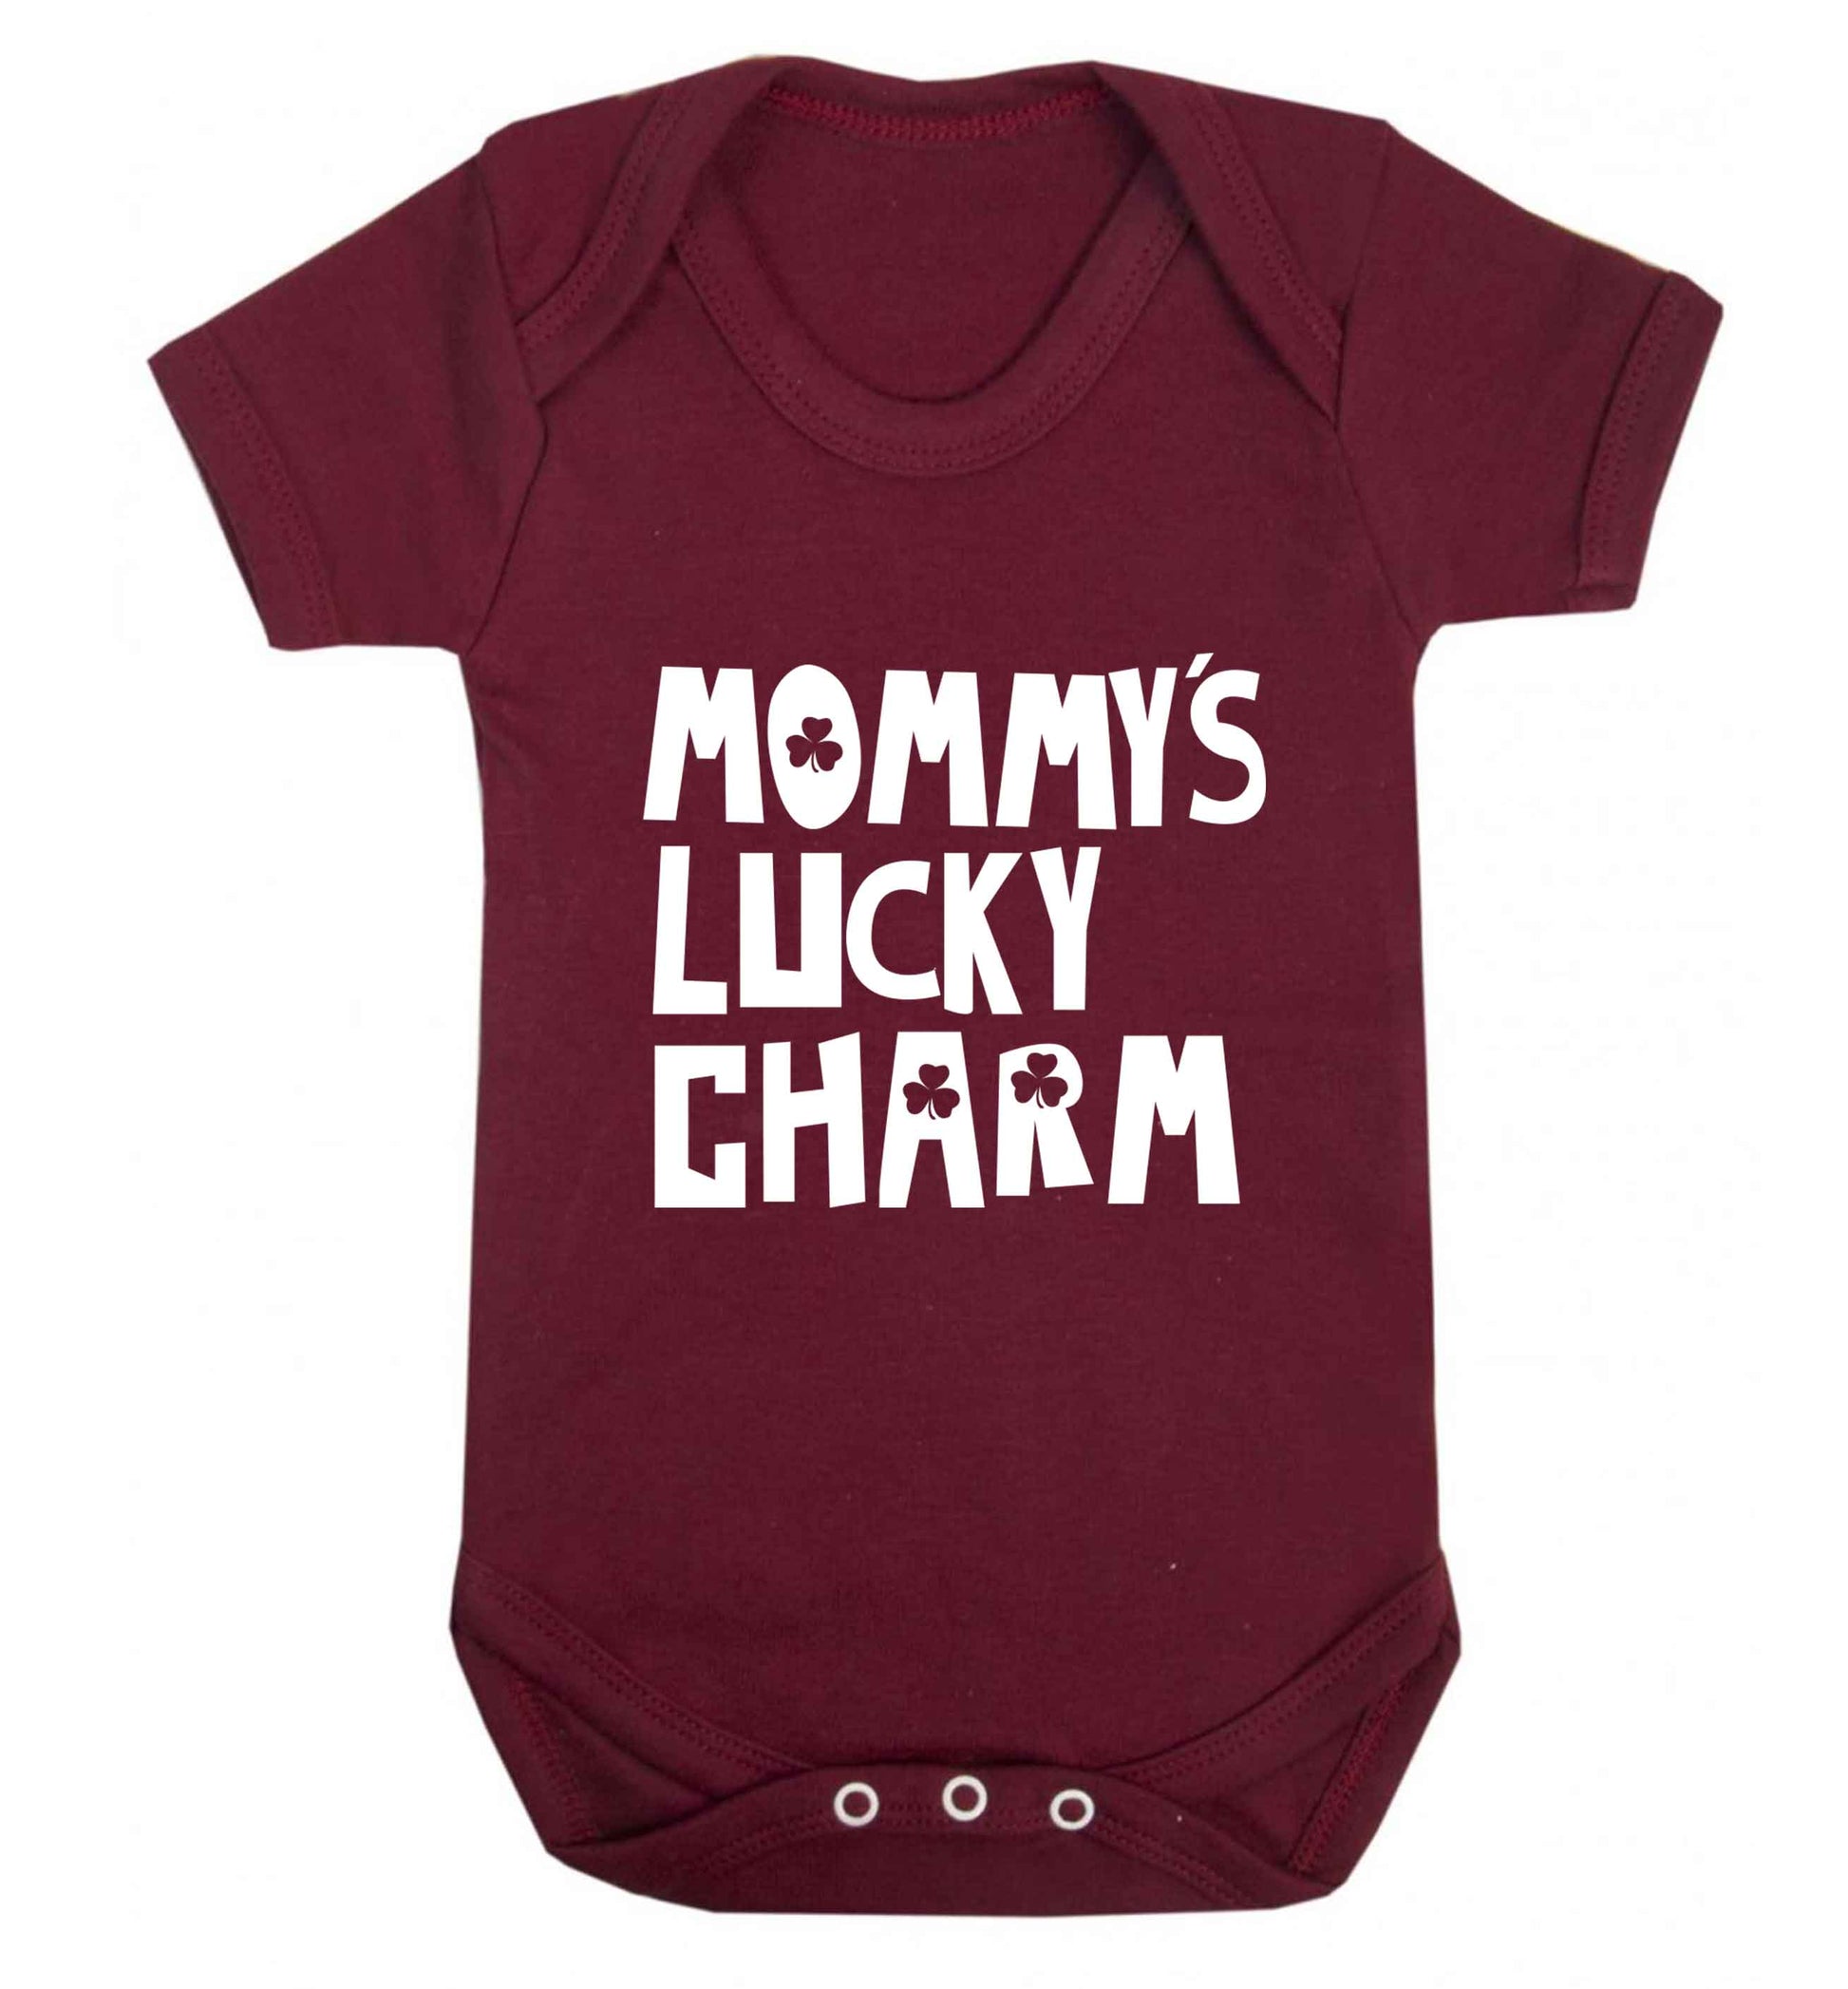 Mommy's lucky charm baby vest maroon 18-24 months